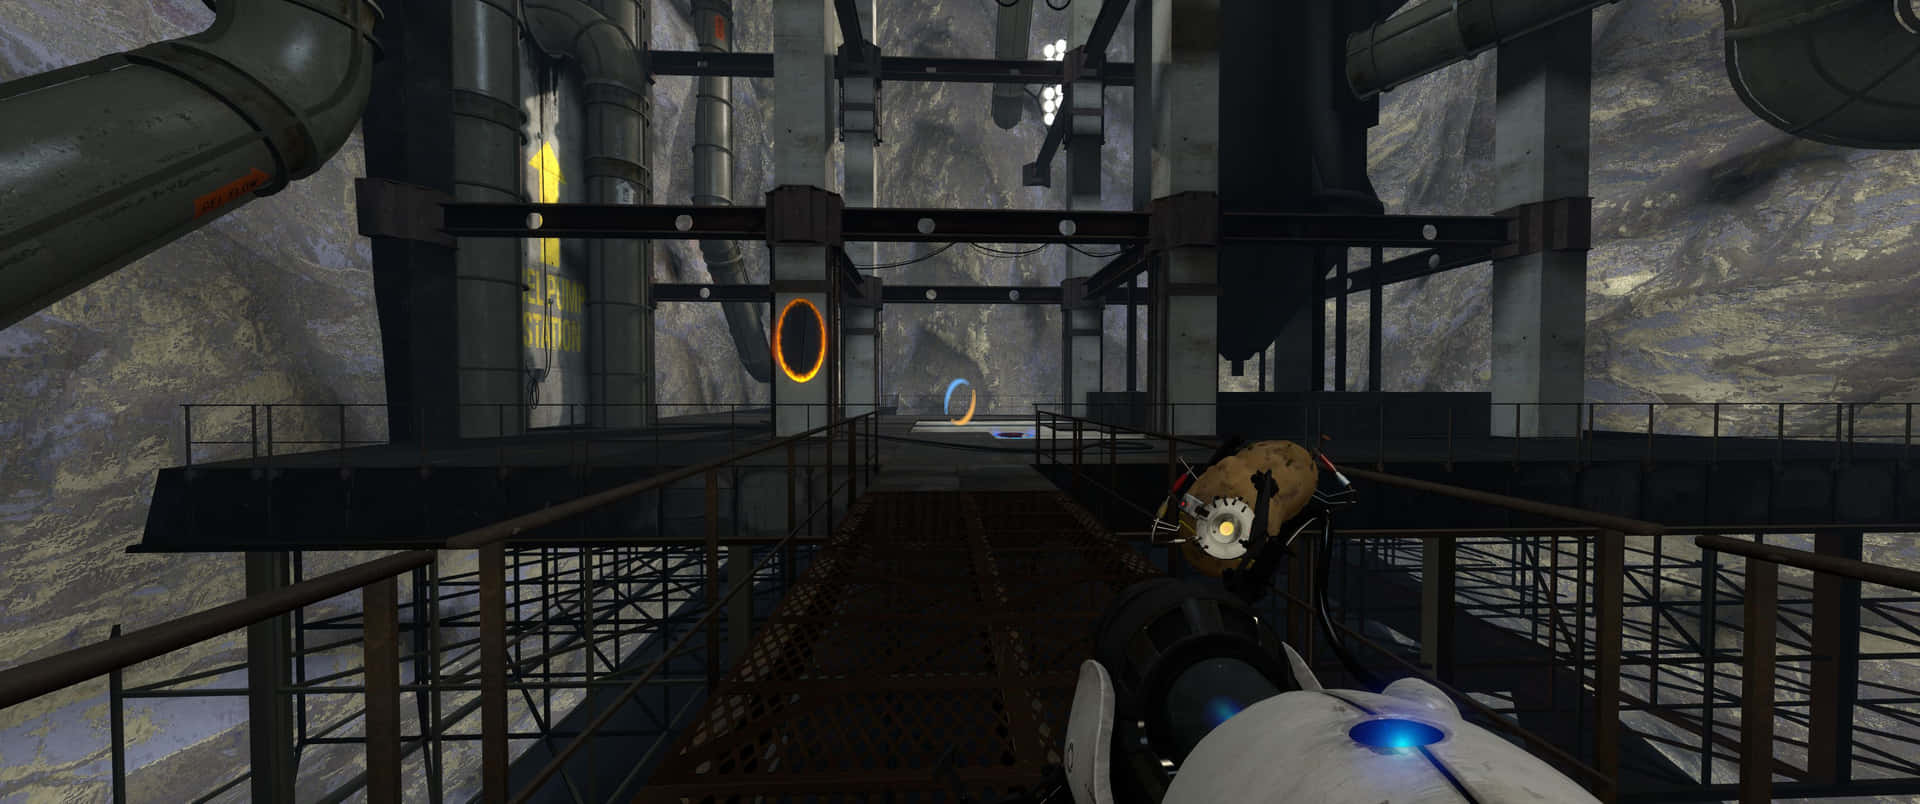 A Screenshot Of A Video Game With A Robot In It